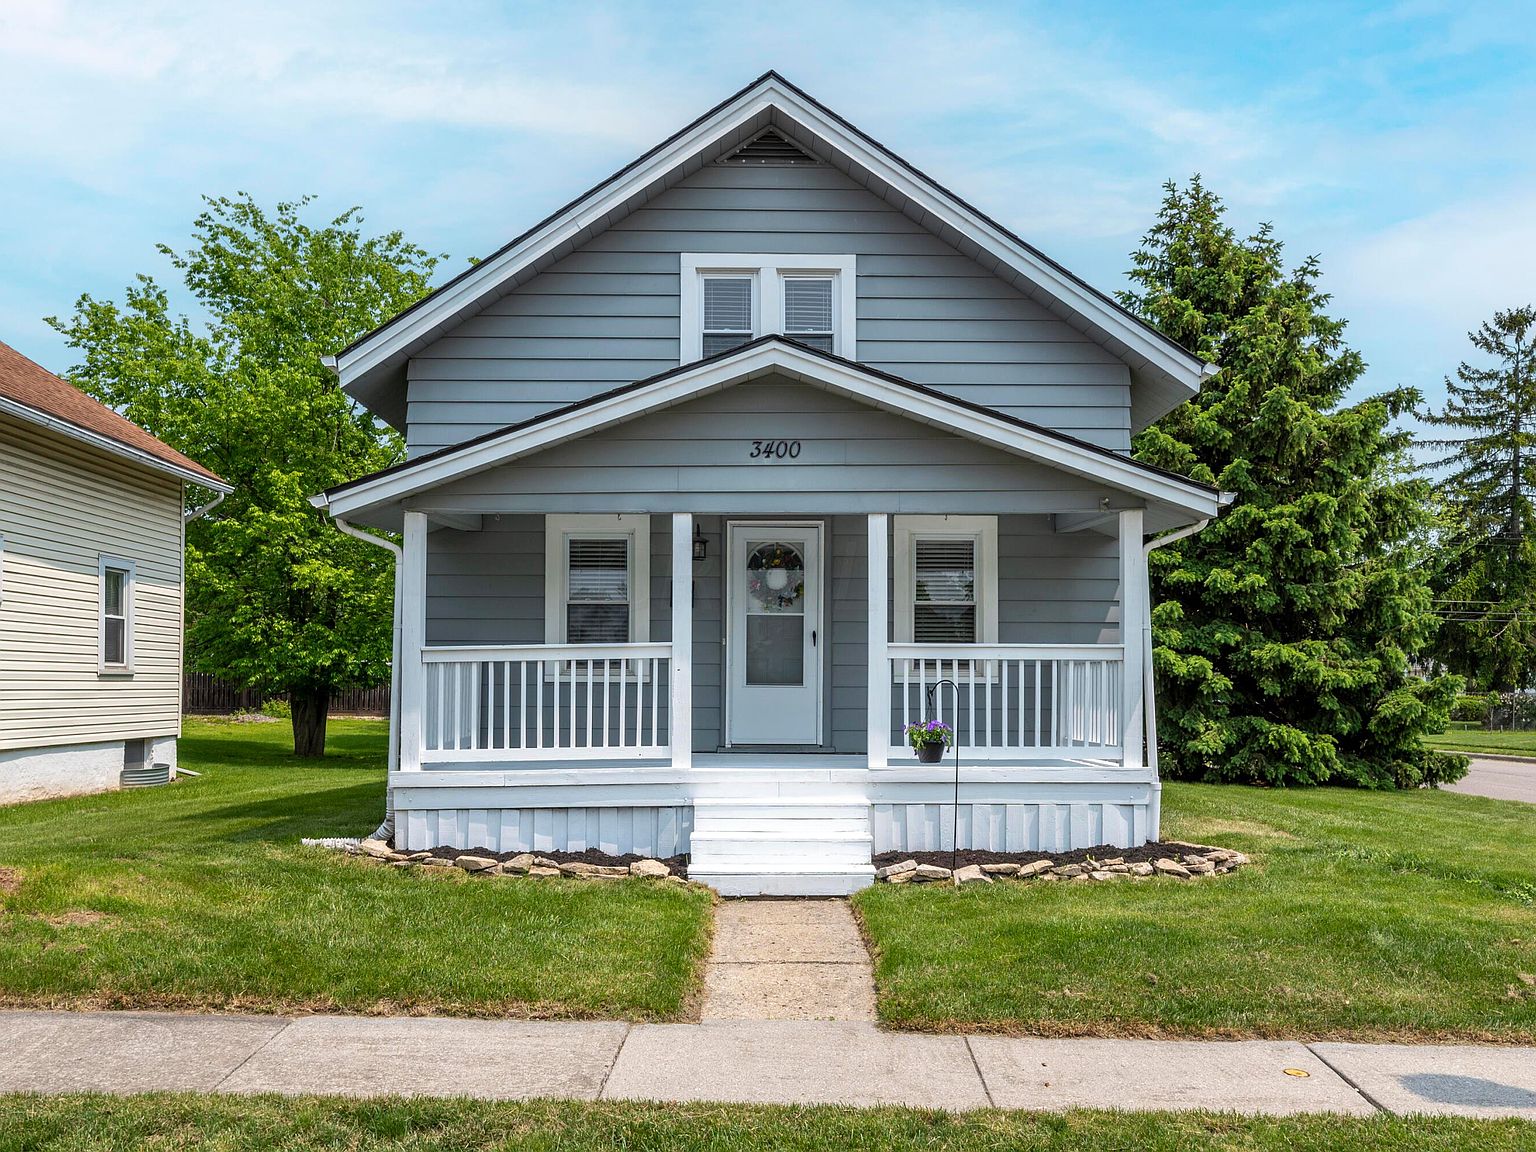 3400 Kingston Ave, Grove City, OH 43123 | Zillow